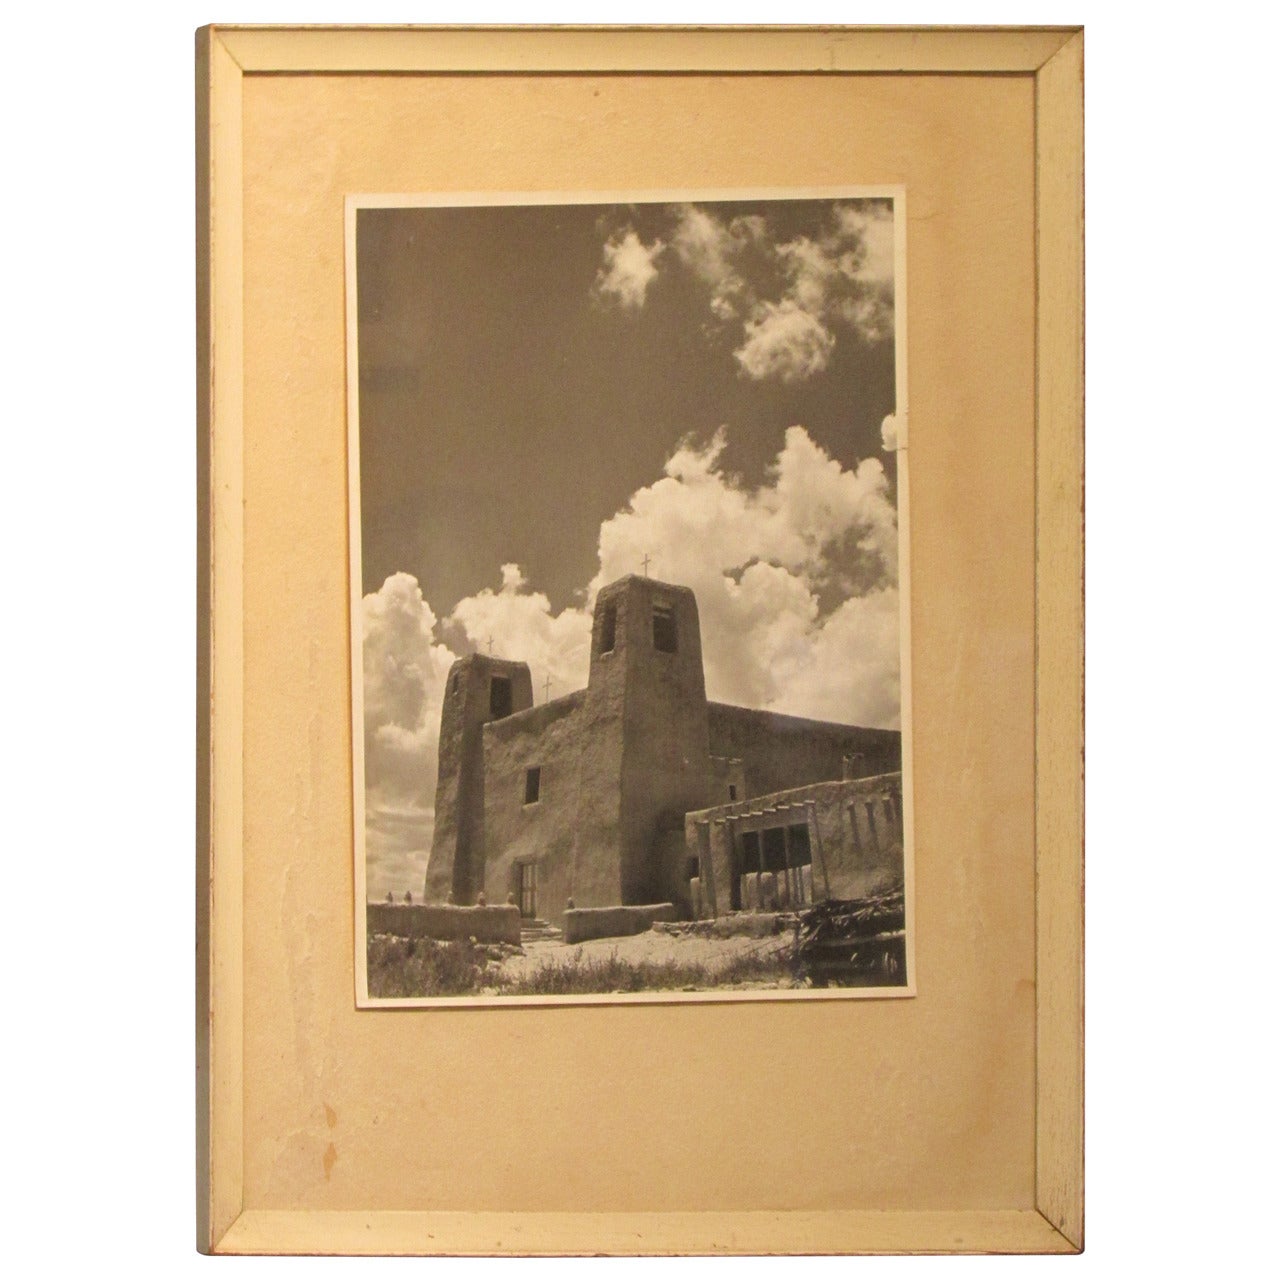 Vintage New Mexico Stark Landscape Photograph with Mission Church